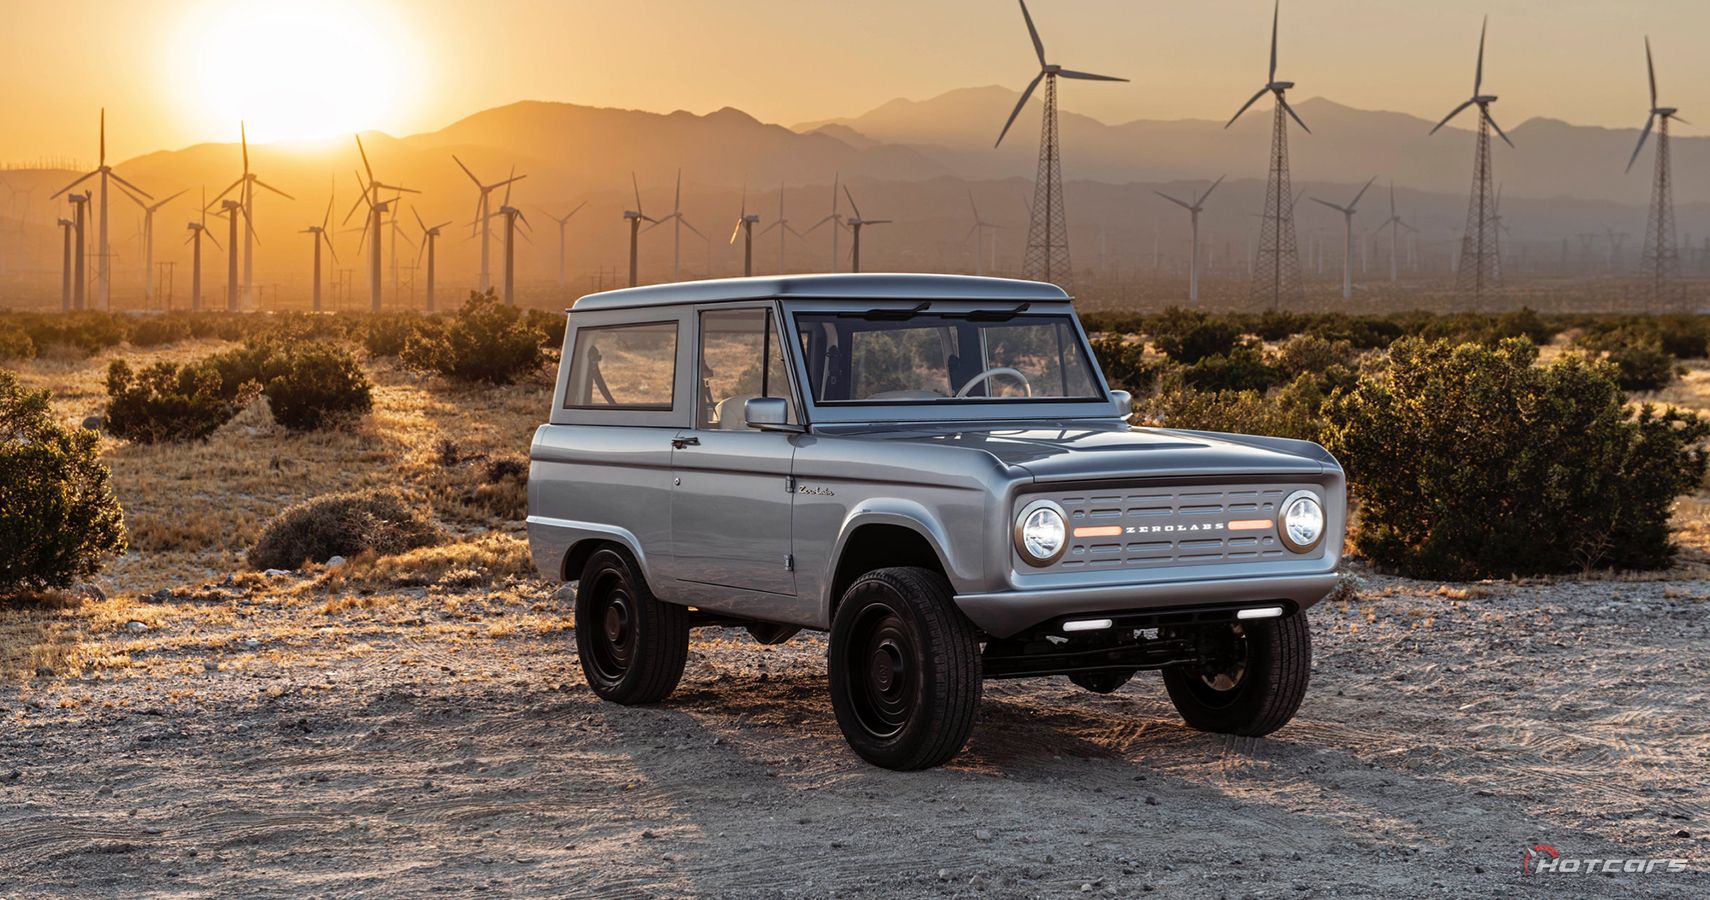 How This California-based Startup Is Making 600 Horsepower Electric Broncos